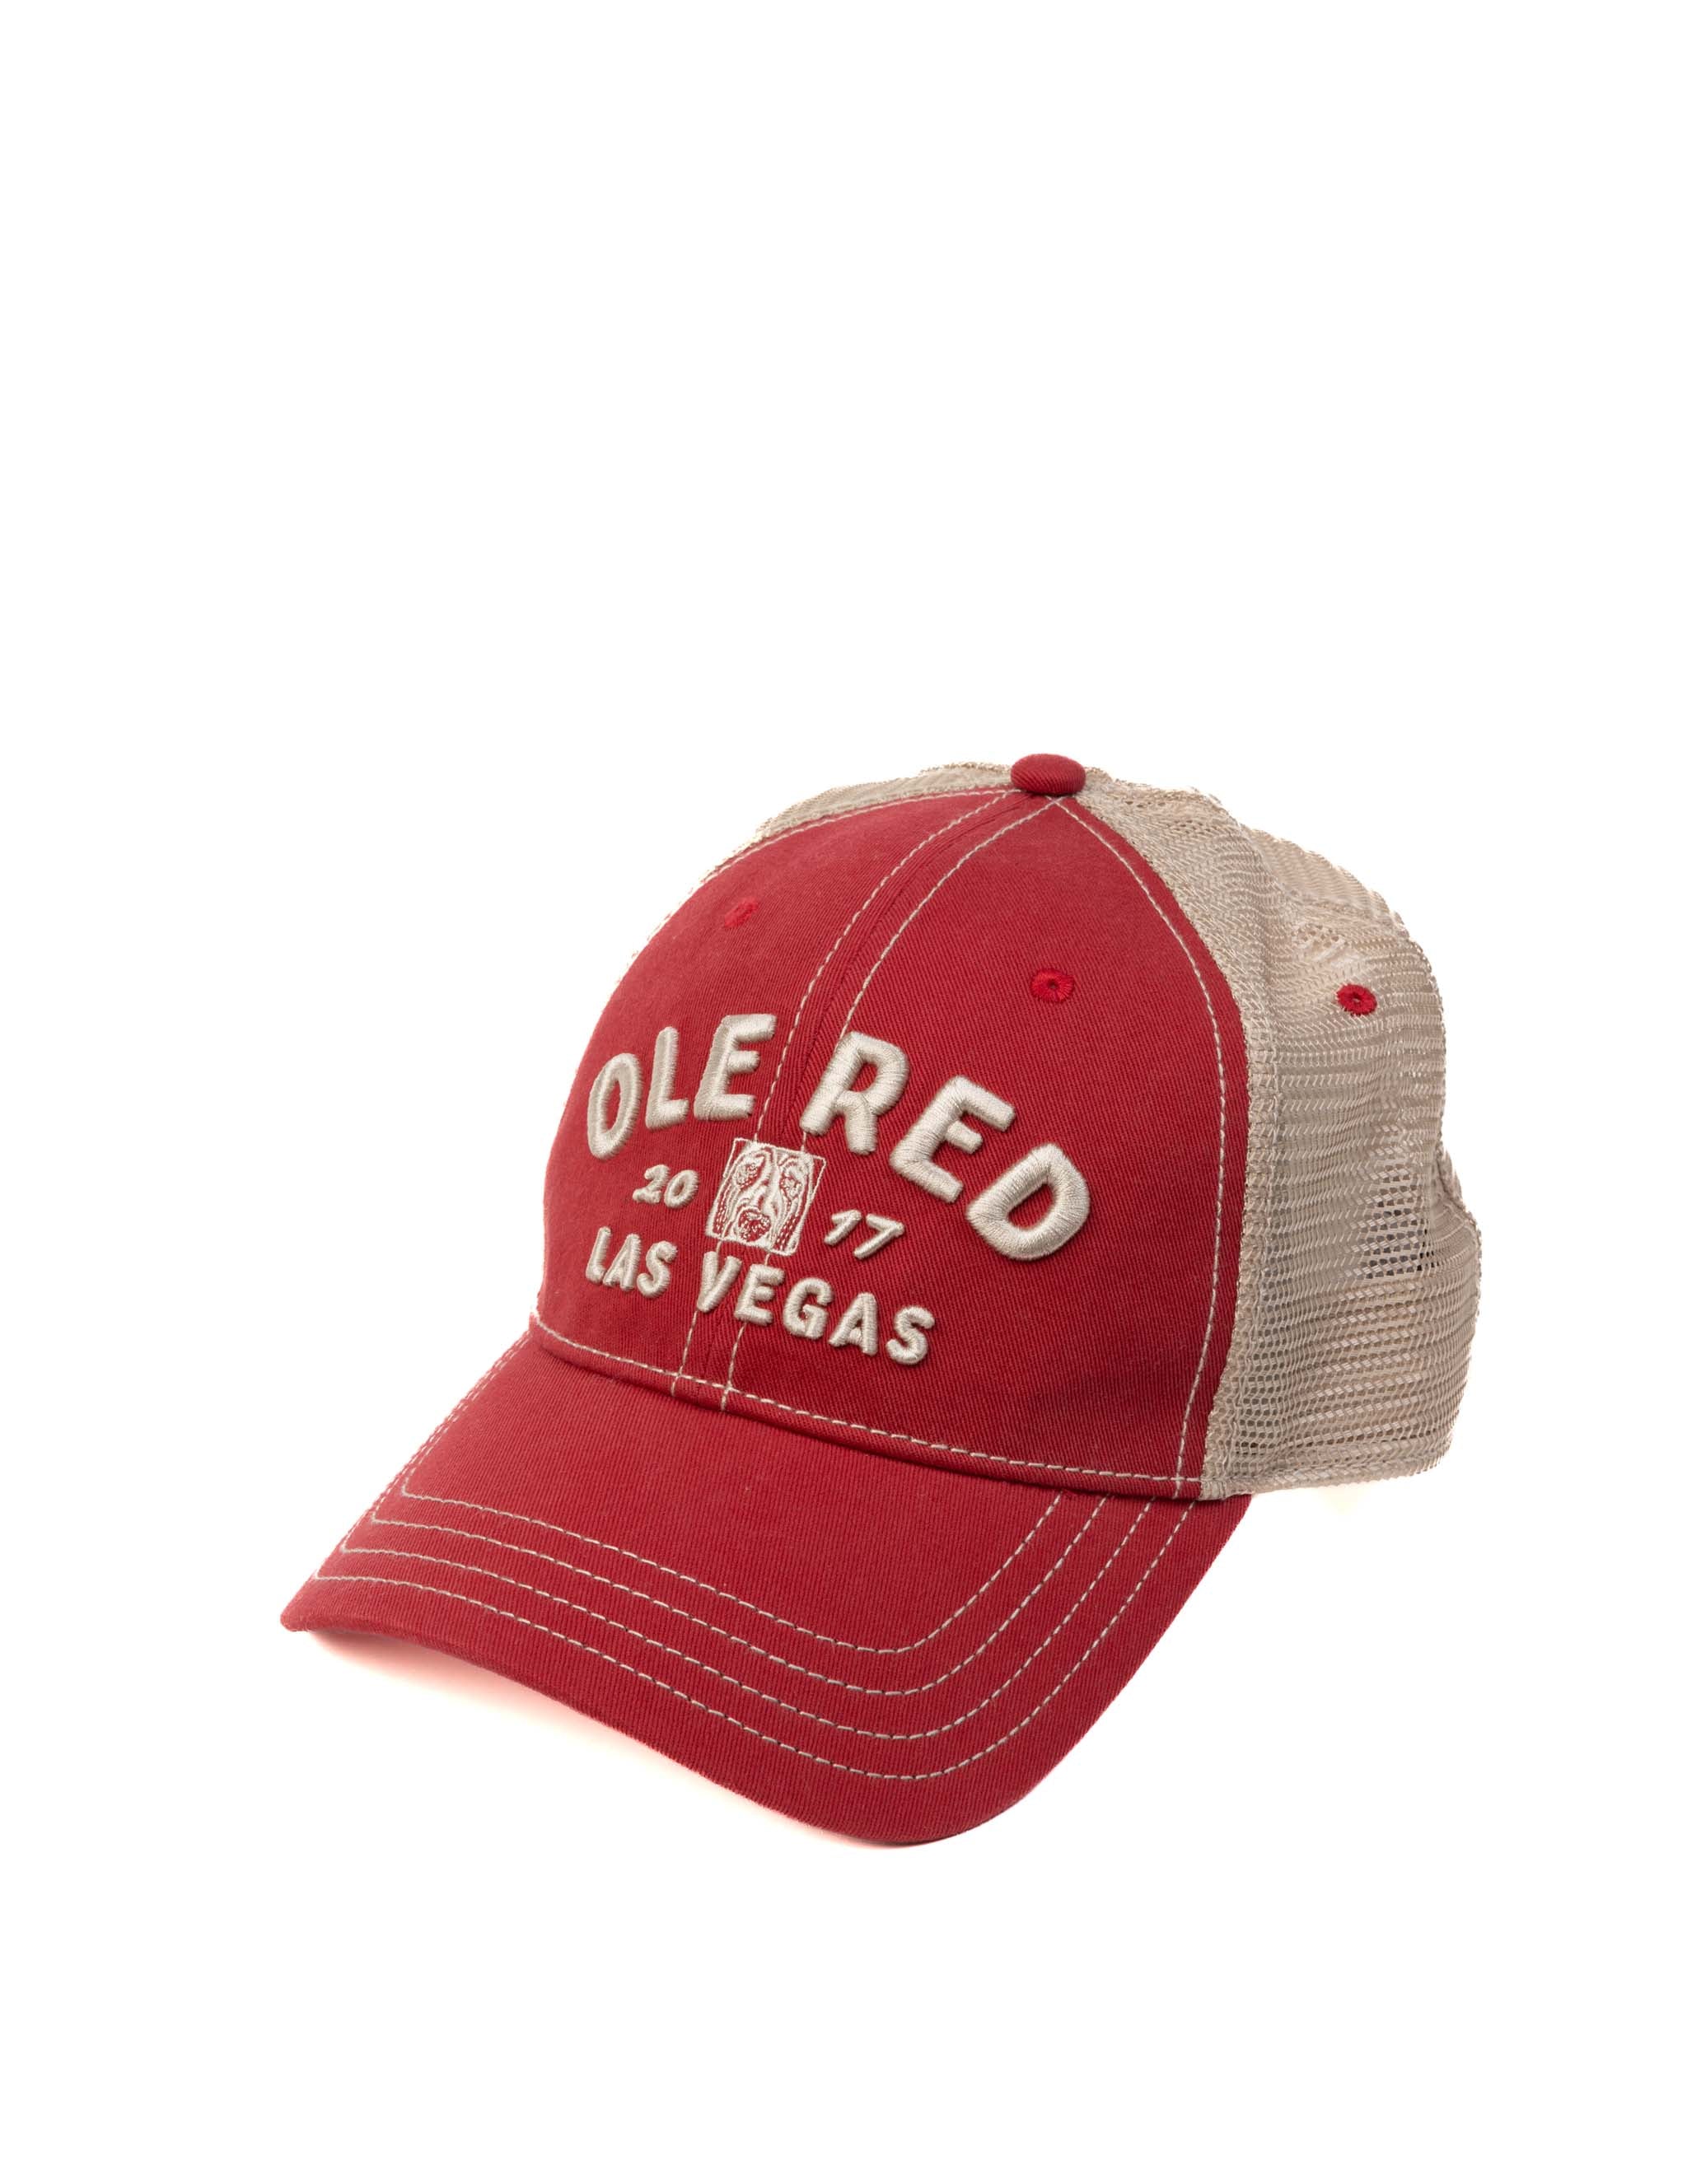 Ole Red Vegas Dog Face Hat